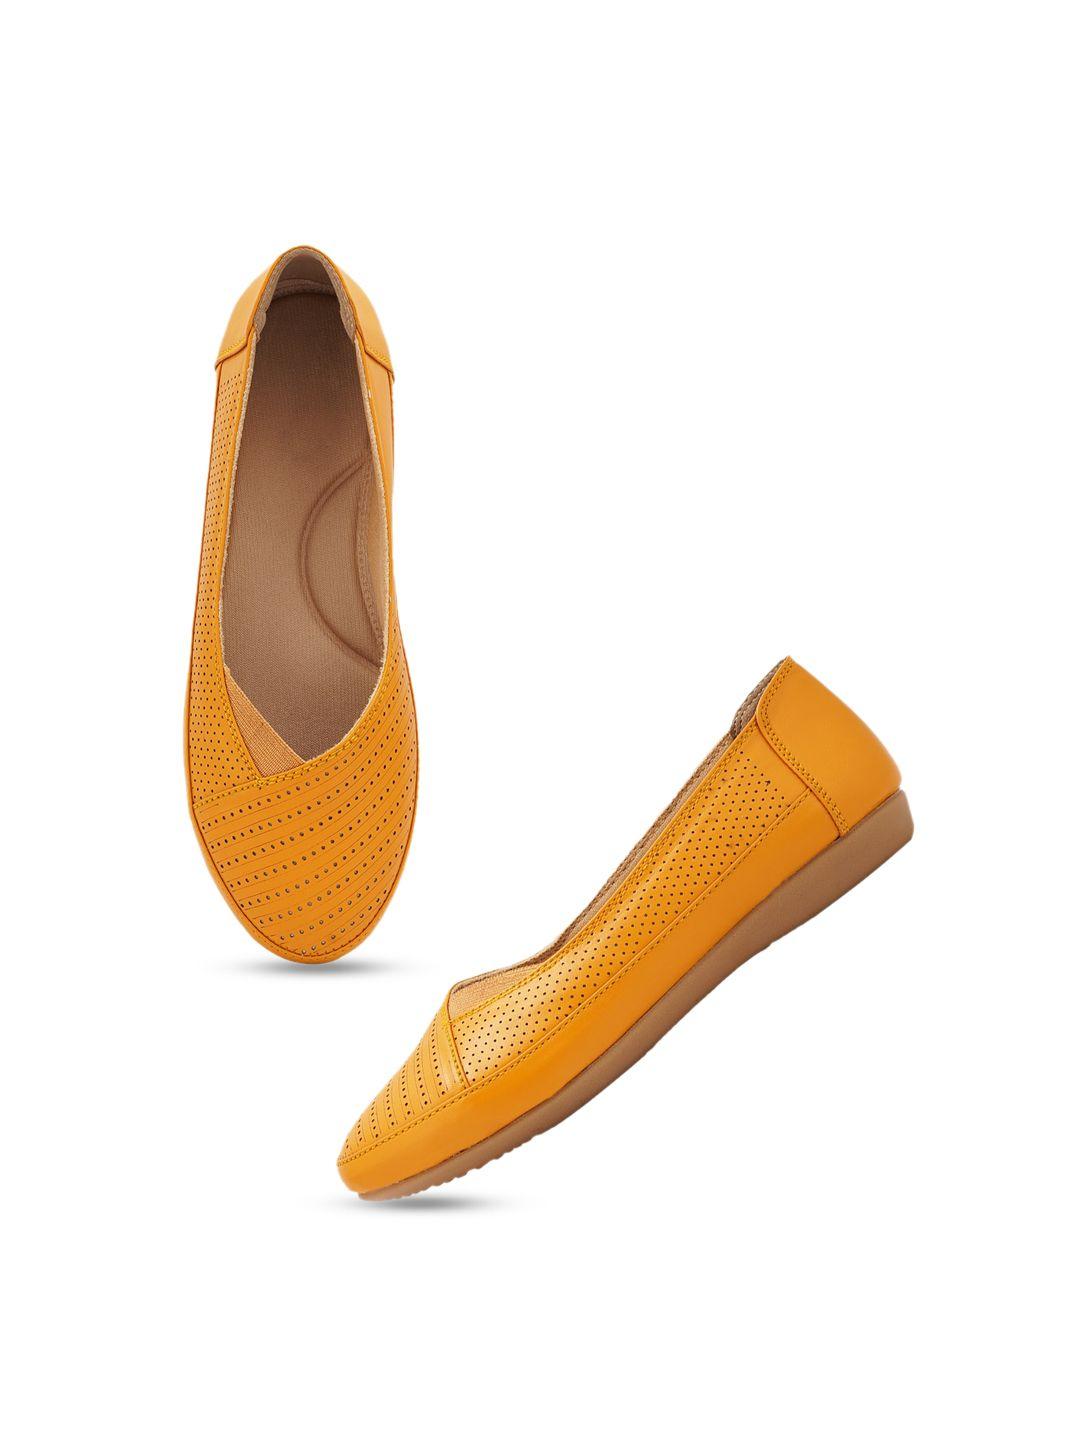 mast & harbour women mustard ballerinas with bows flats